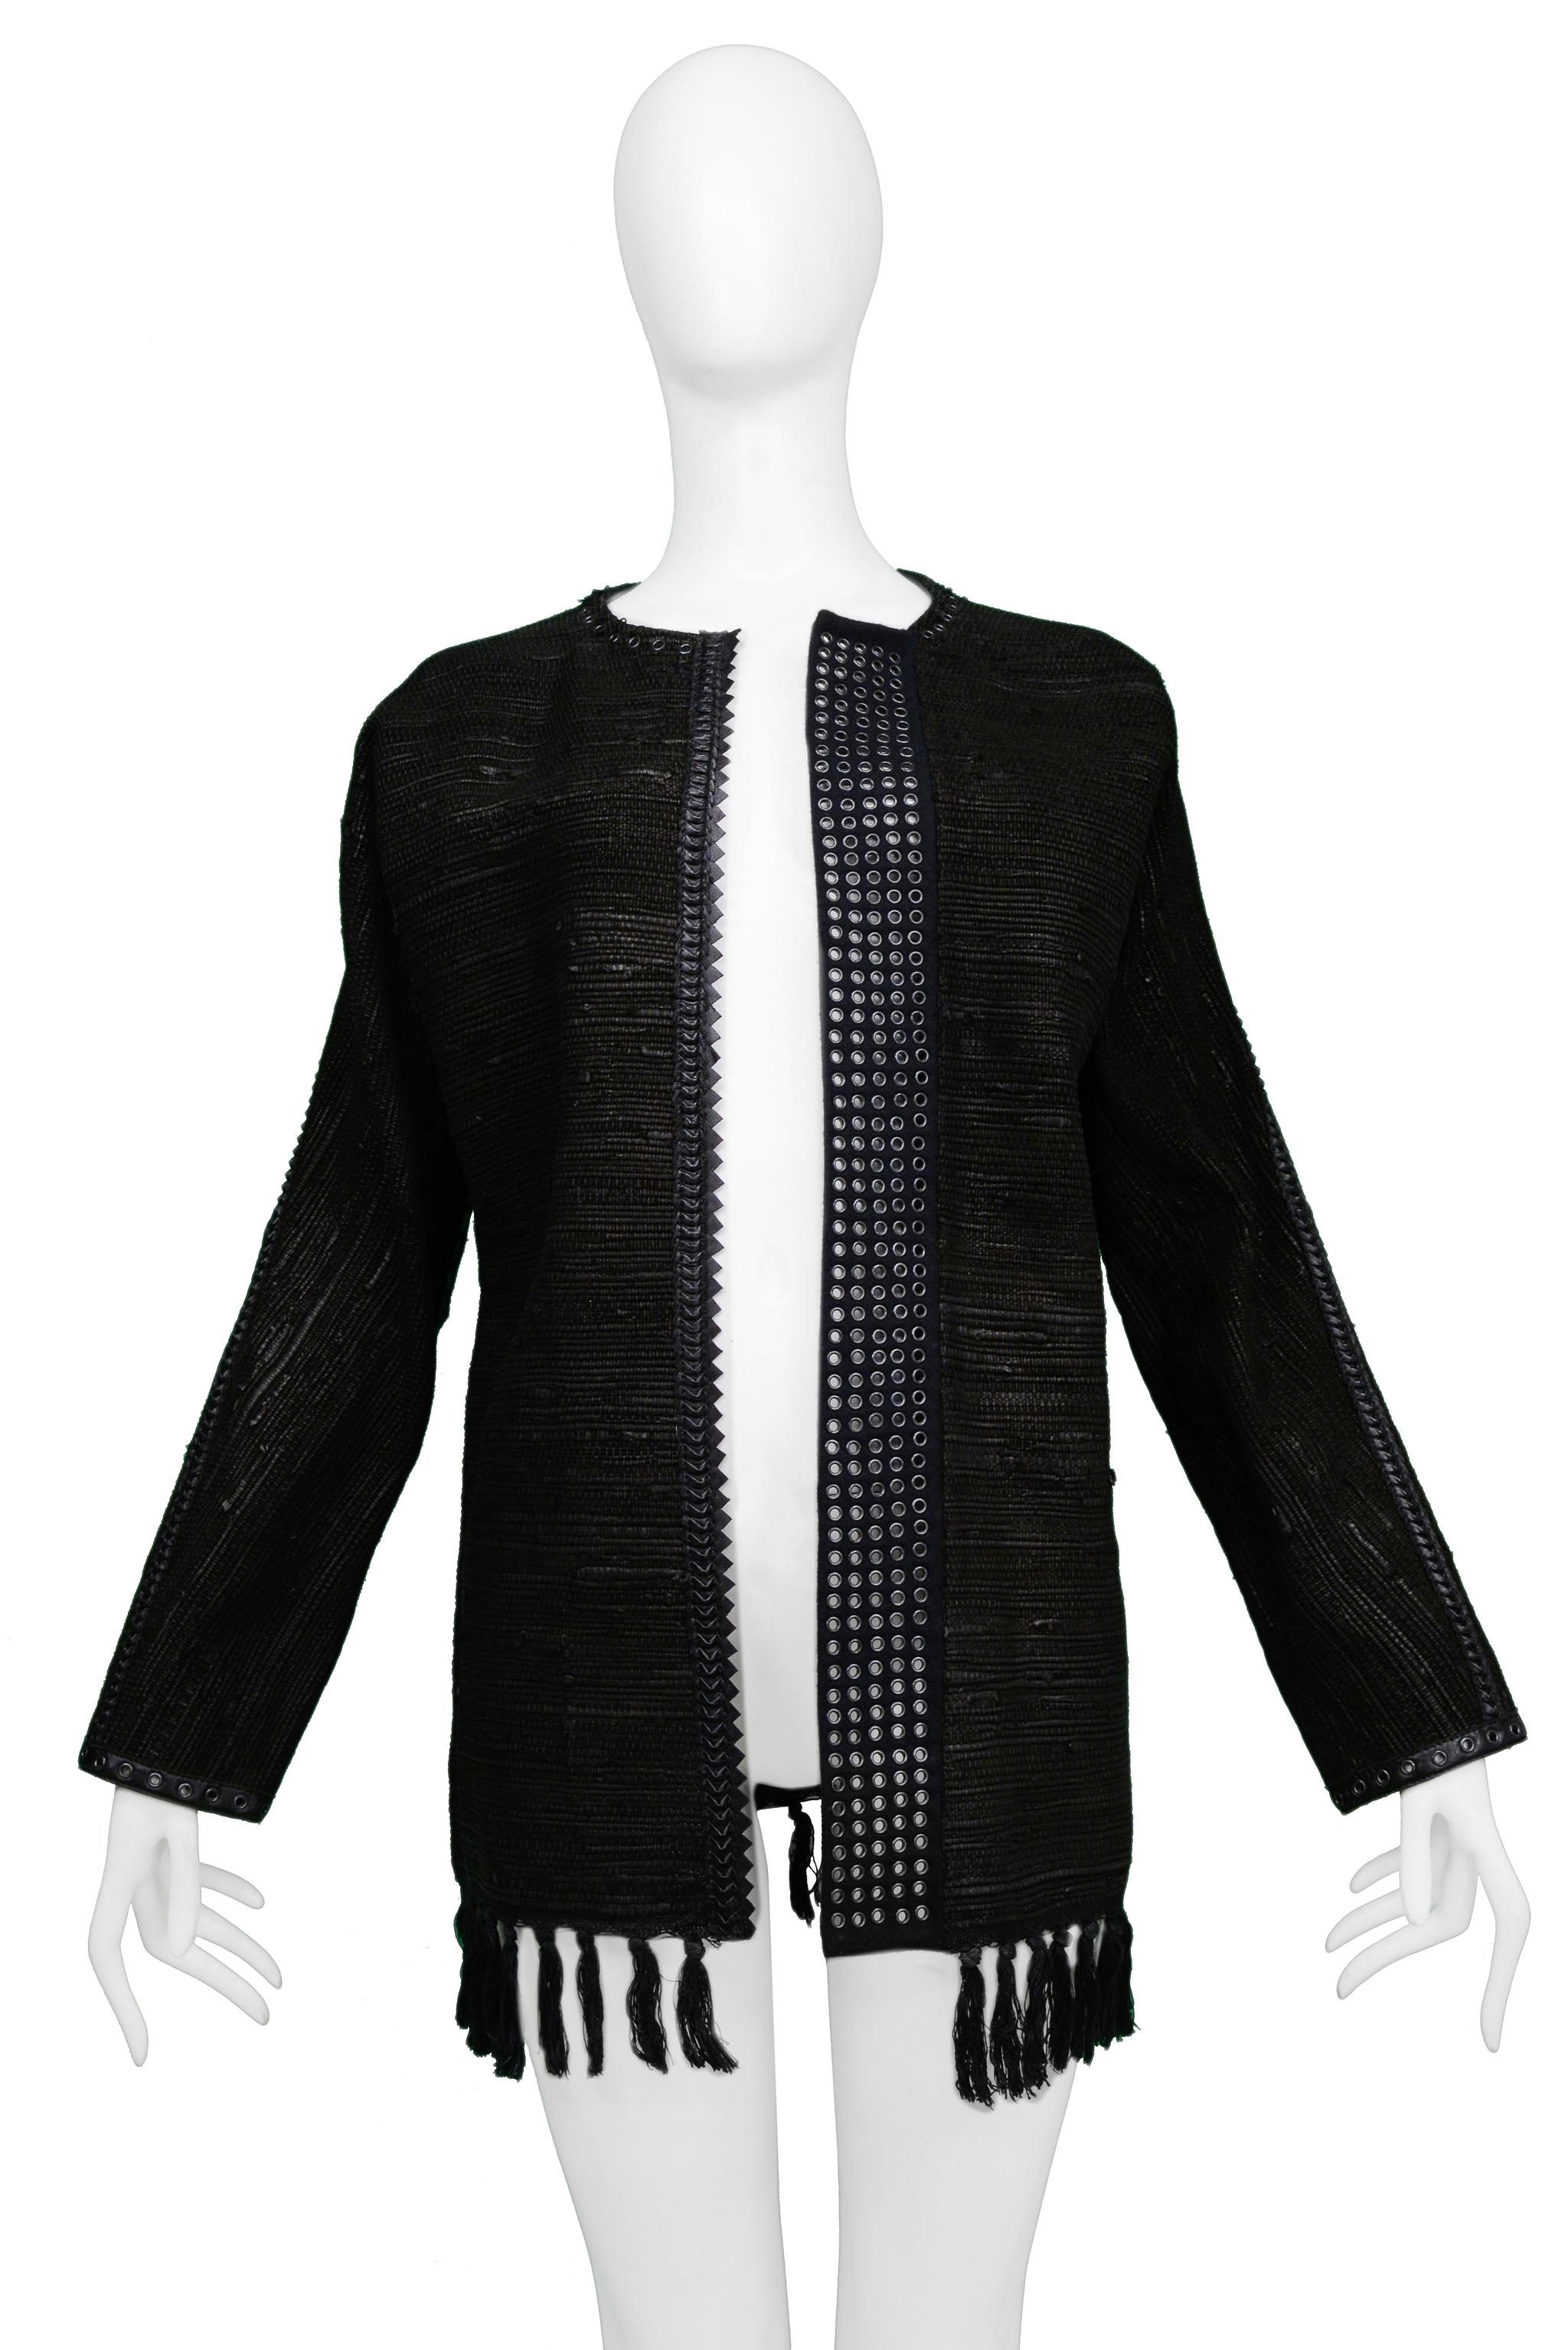 Resurrection Vintage is excited to offer a vintage Gianfranco Ferre black leather and textured wool collarless jacket featuring black leather trim, black leather lacing at the seams, rows of silver-tone grommets, center front zipper, and fringe